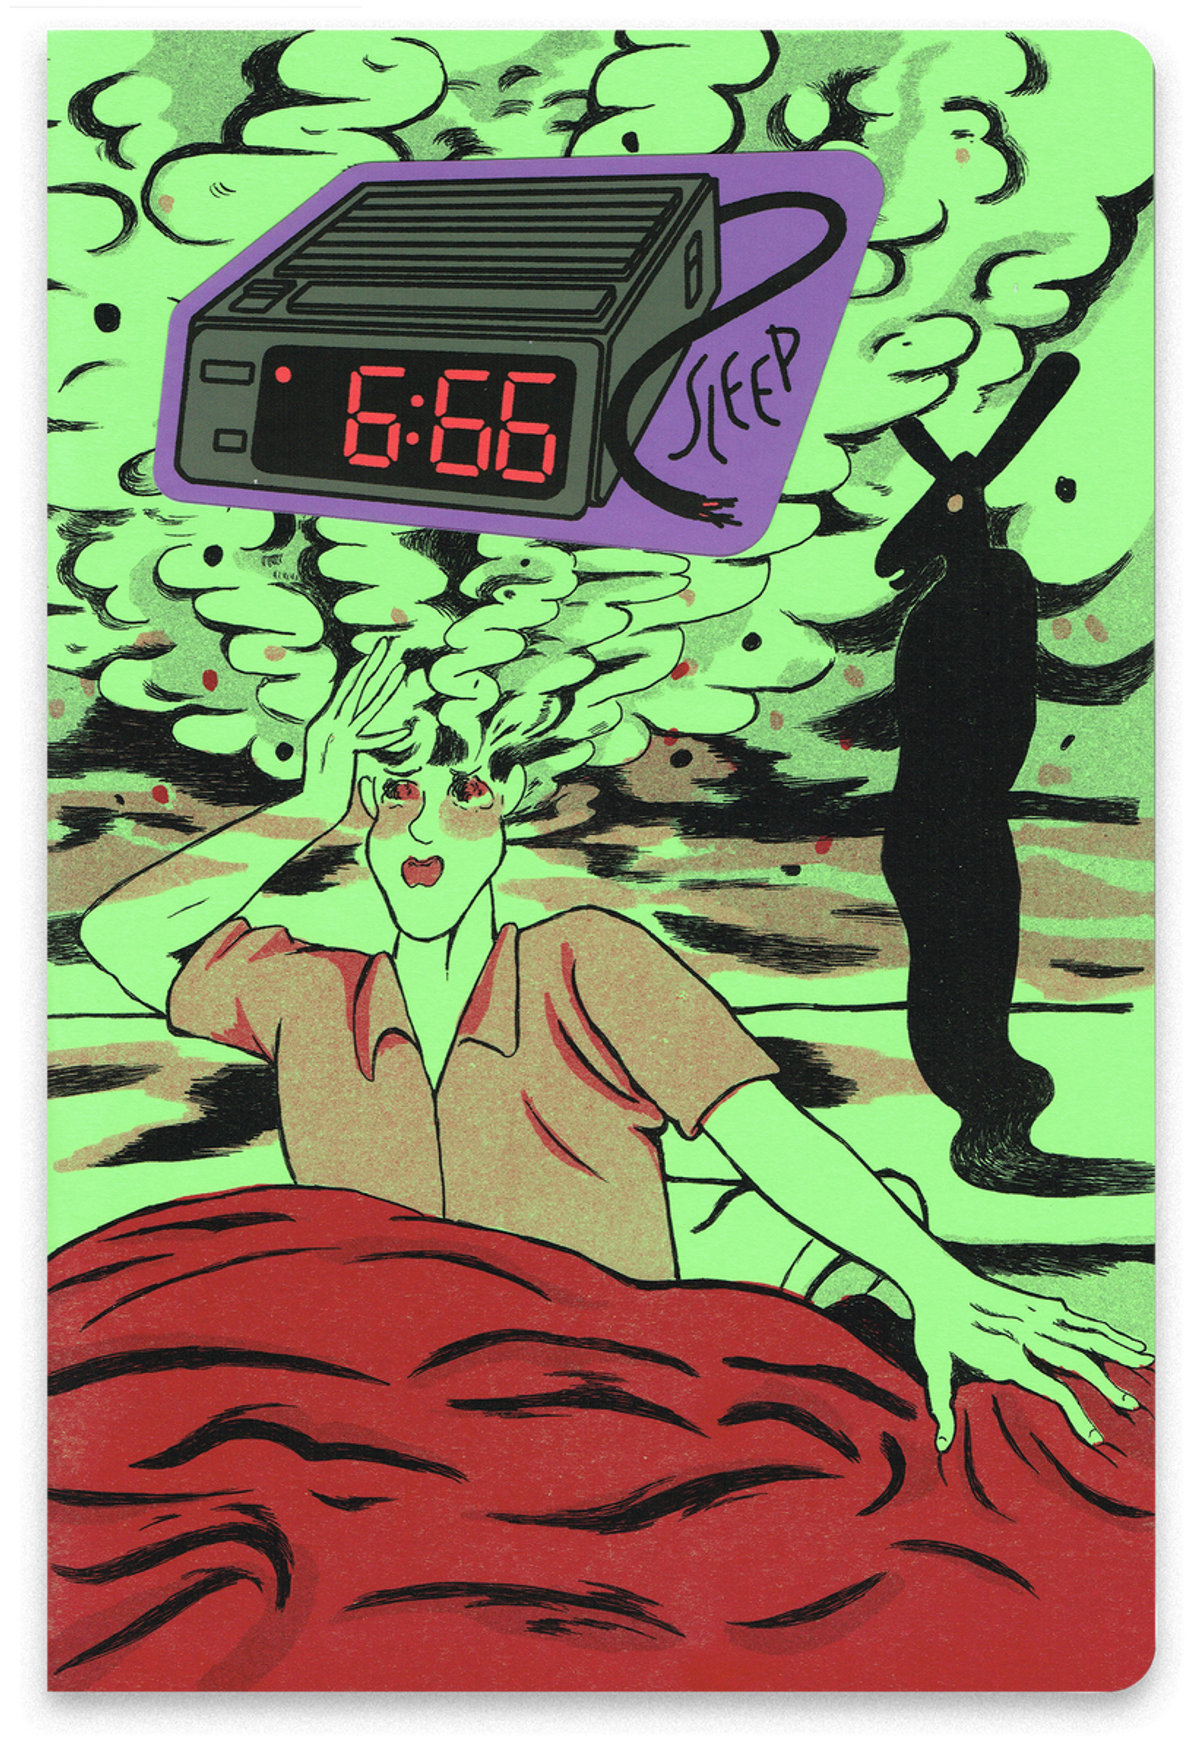 Cover by lurn maxwell, sticker and text by Eric Schneider. Image of a man being woken up in the middle of the night by a terror. The terror lingers in the background, its horns stretching towards the ceiling.